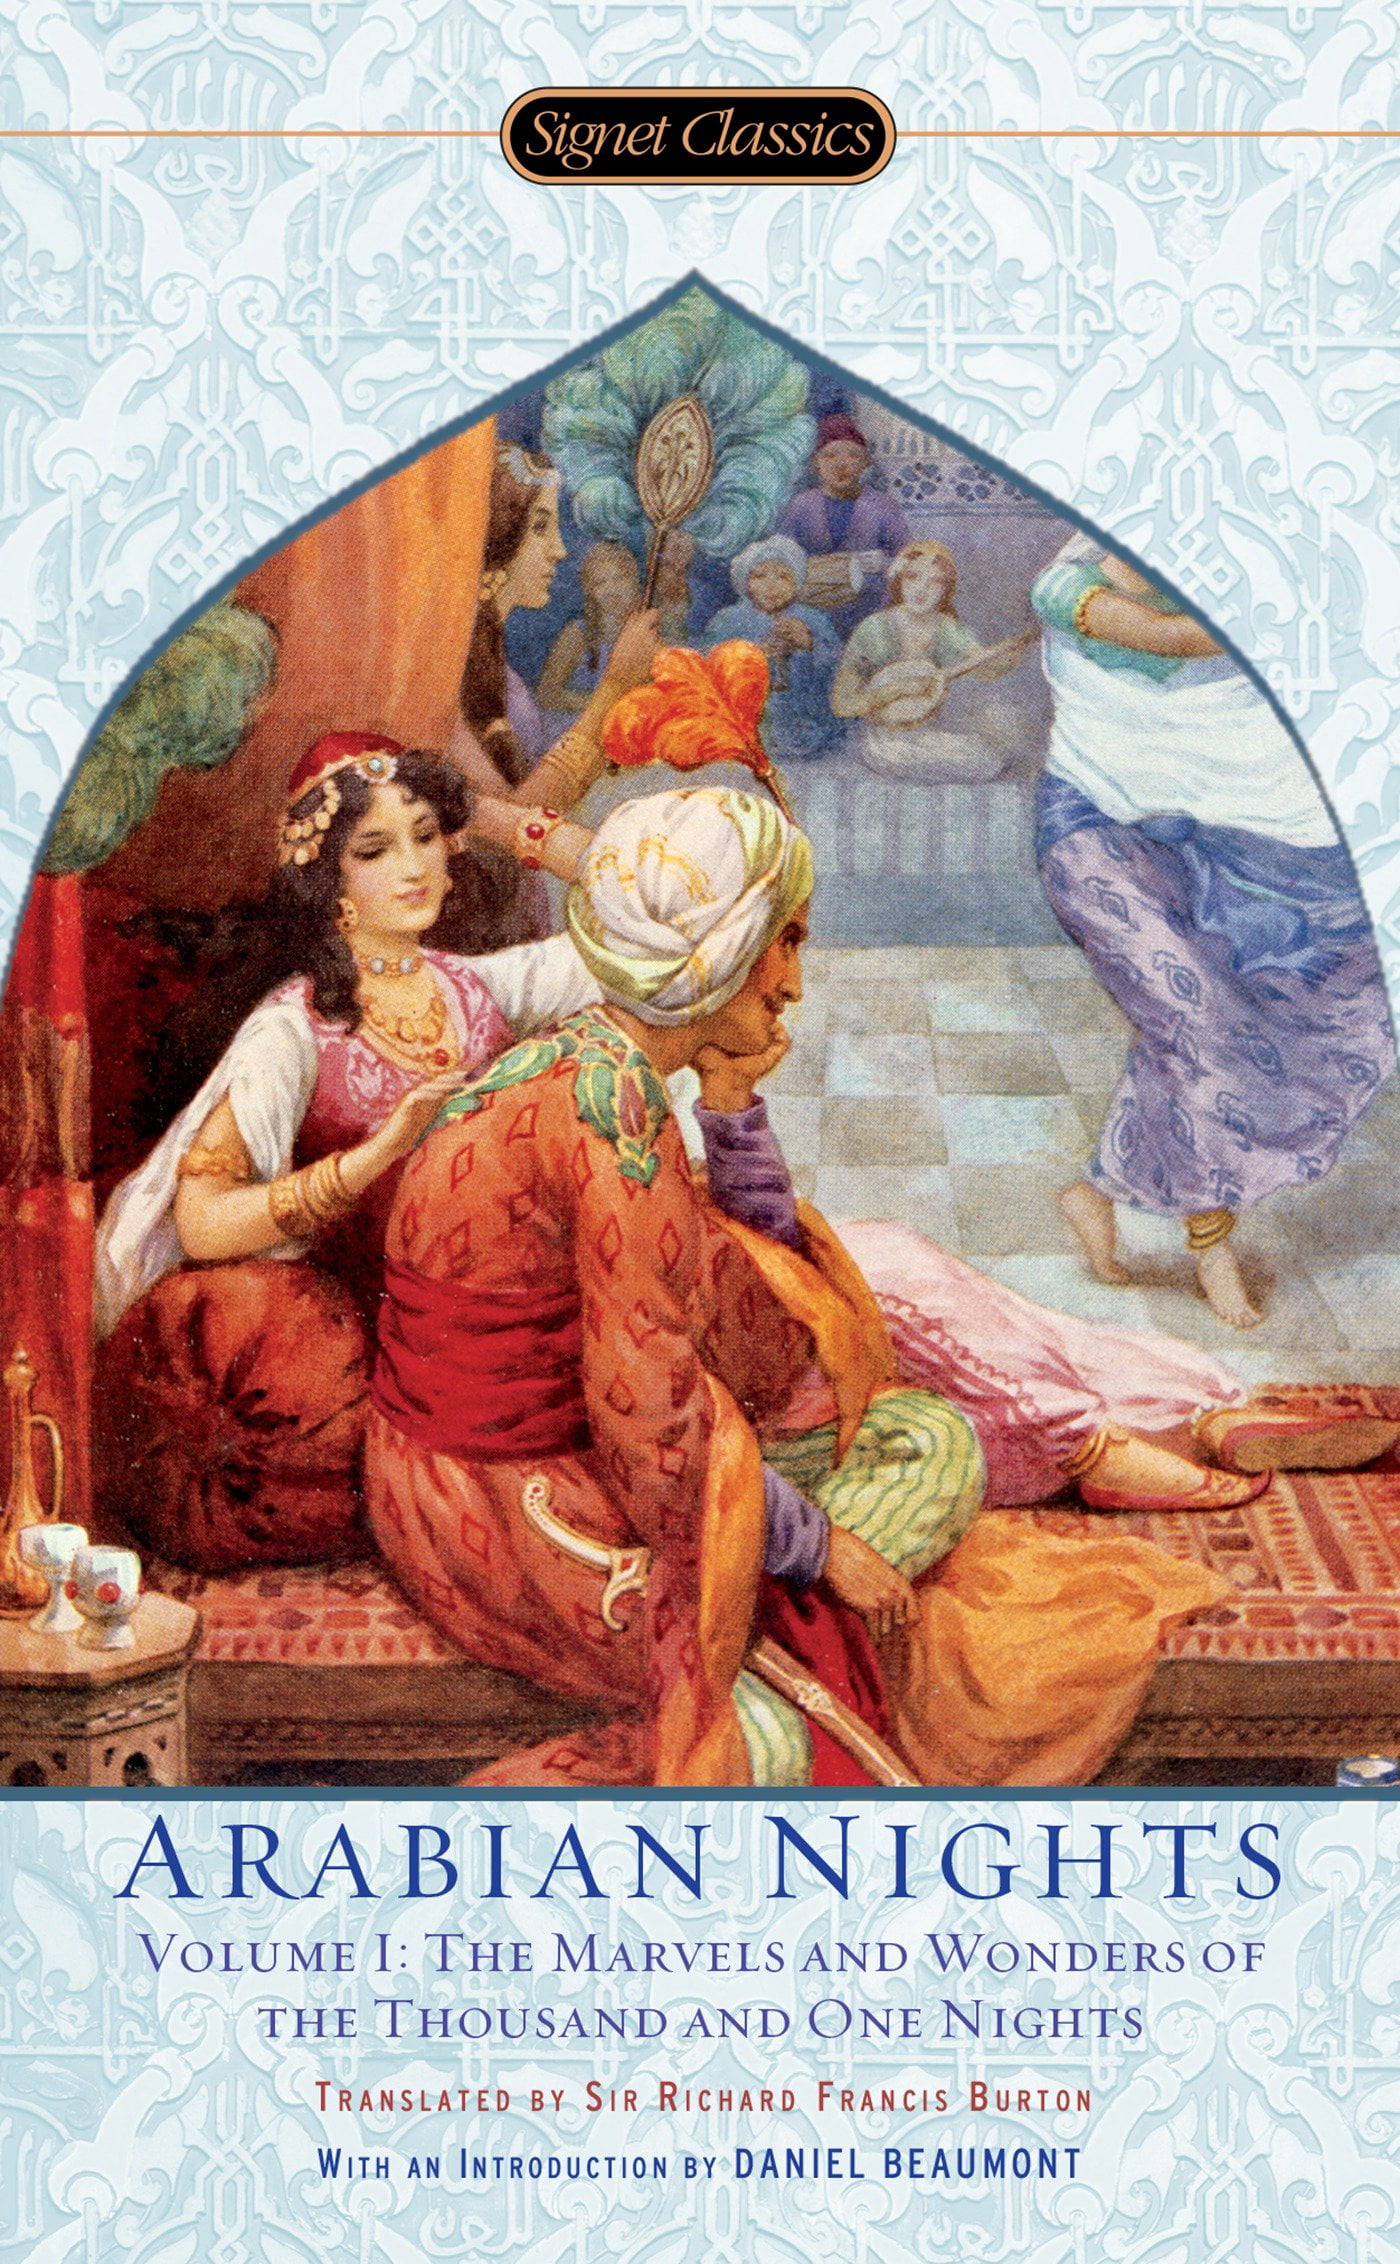 The Arabian Nights, Volume I : The Marvels and Wonders of The Thousand and One Nights